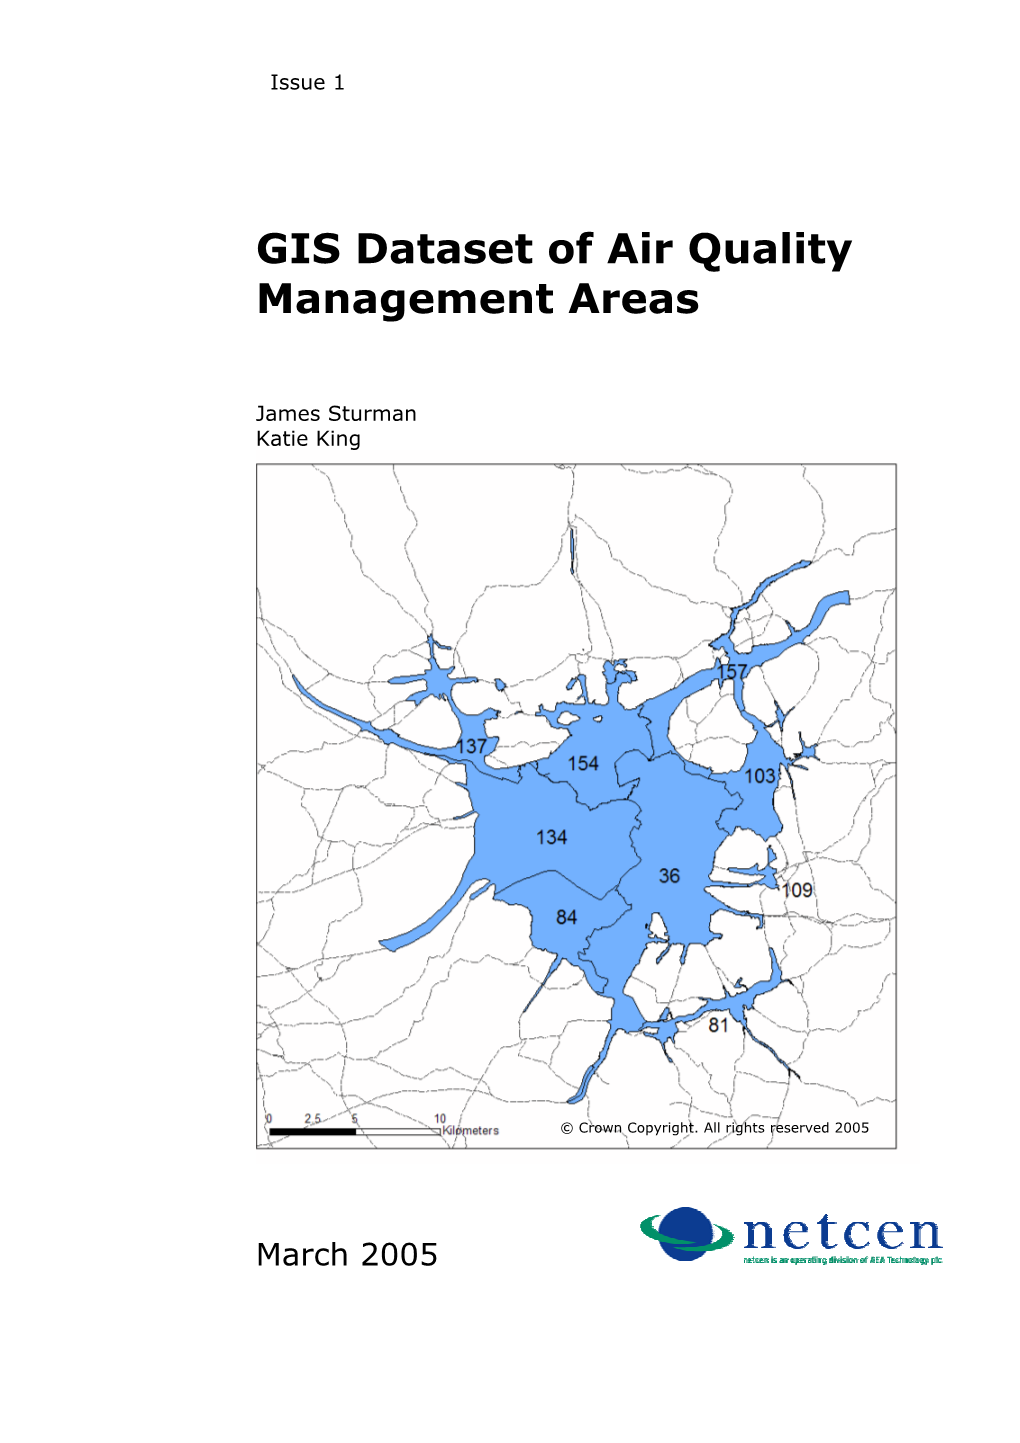 GIS Dataset of Air Quality Management Areas